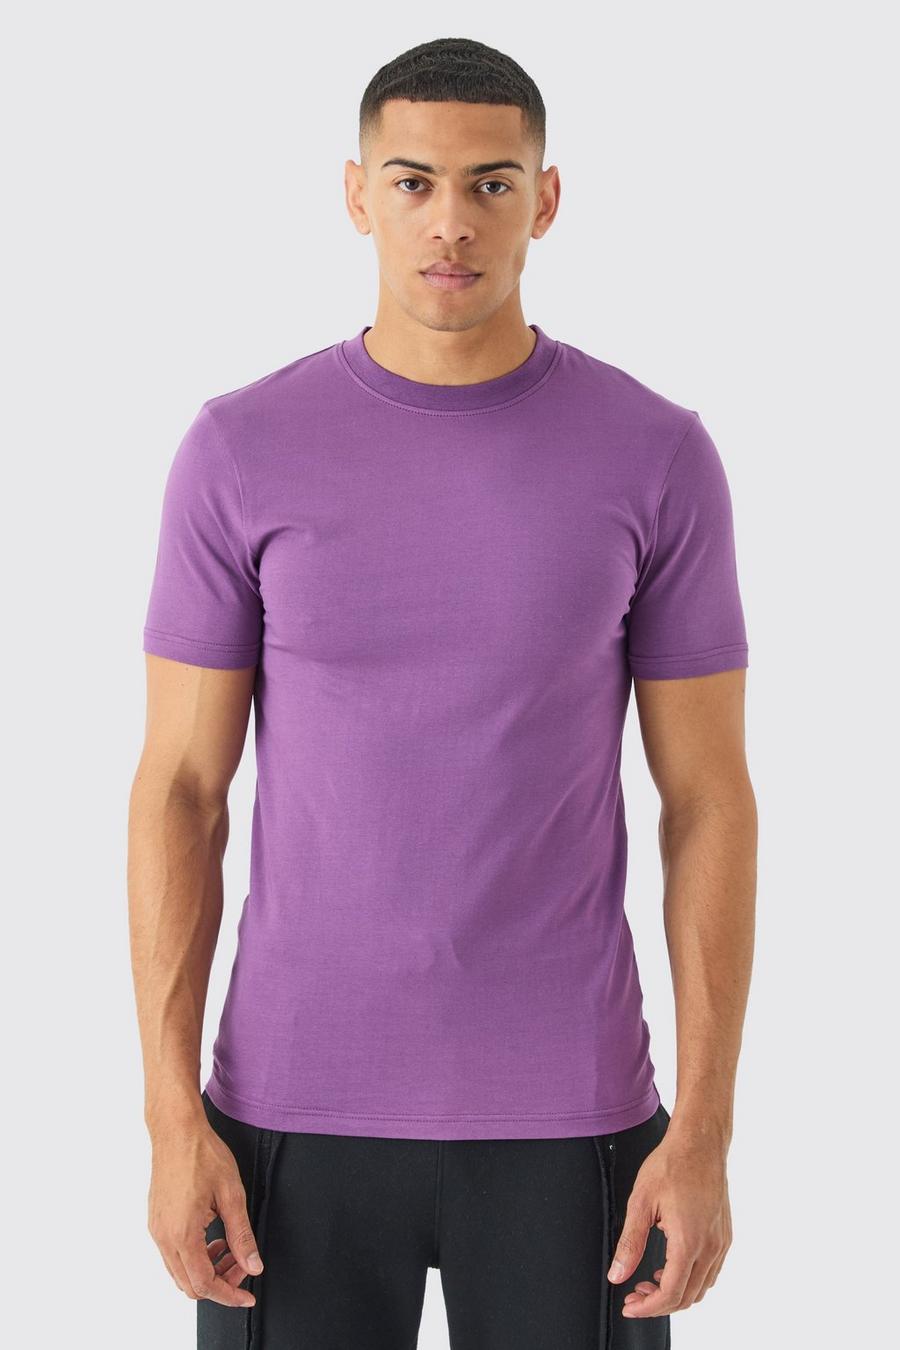 Basic Man Muscle-Fit T-Shirt, Purple image number 1